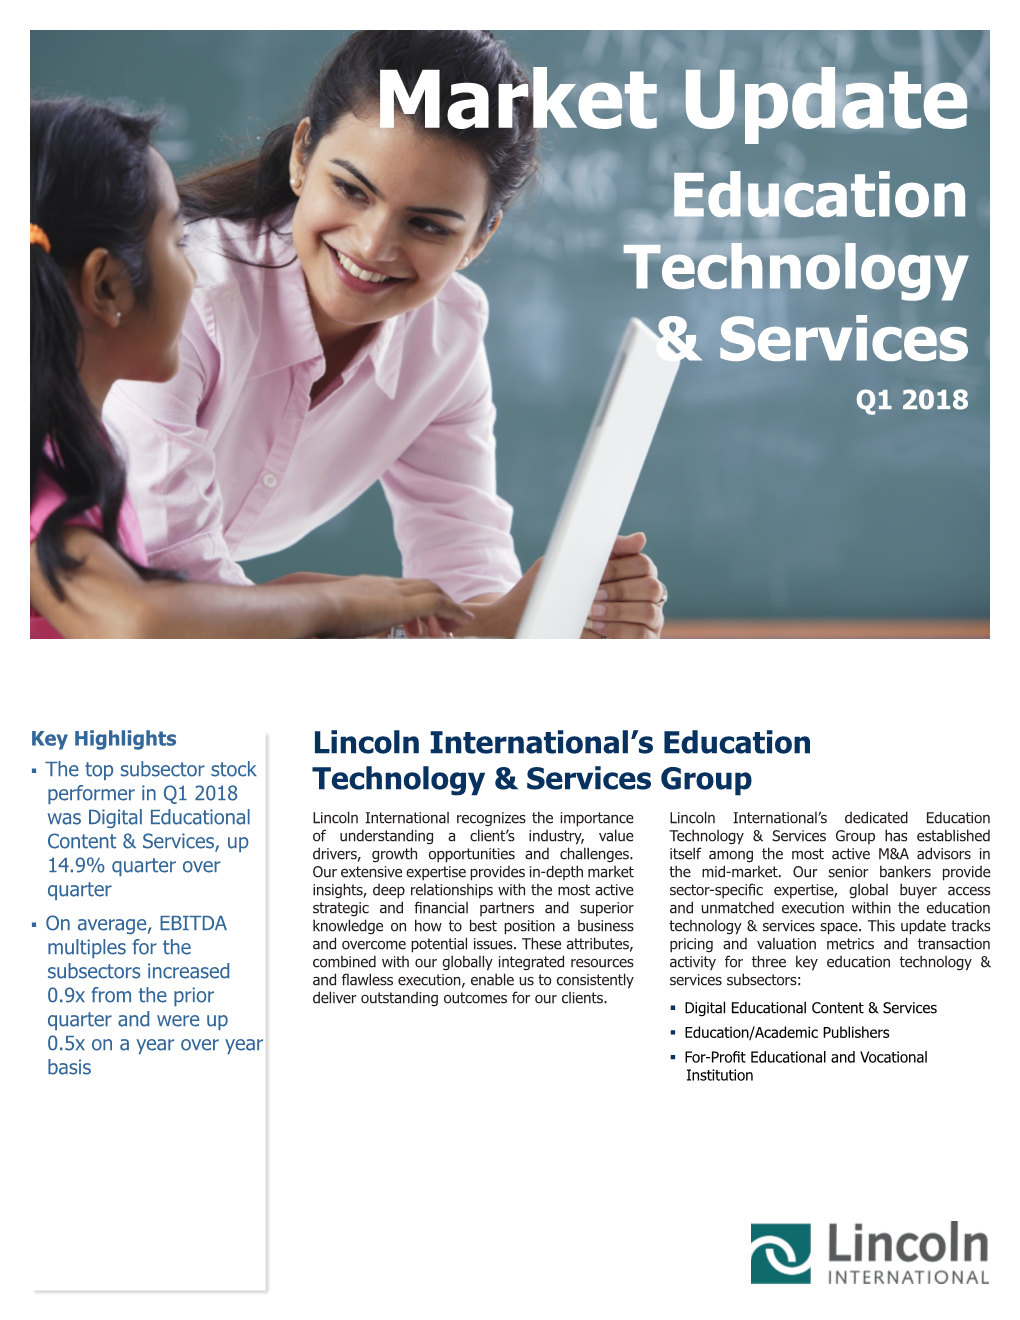 Market Update Education Technology & Services